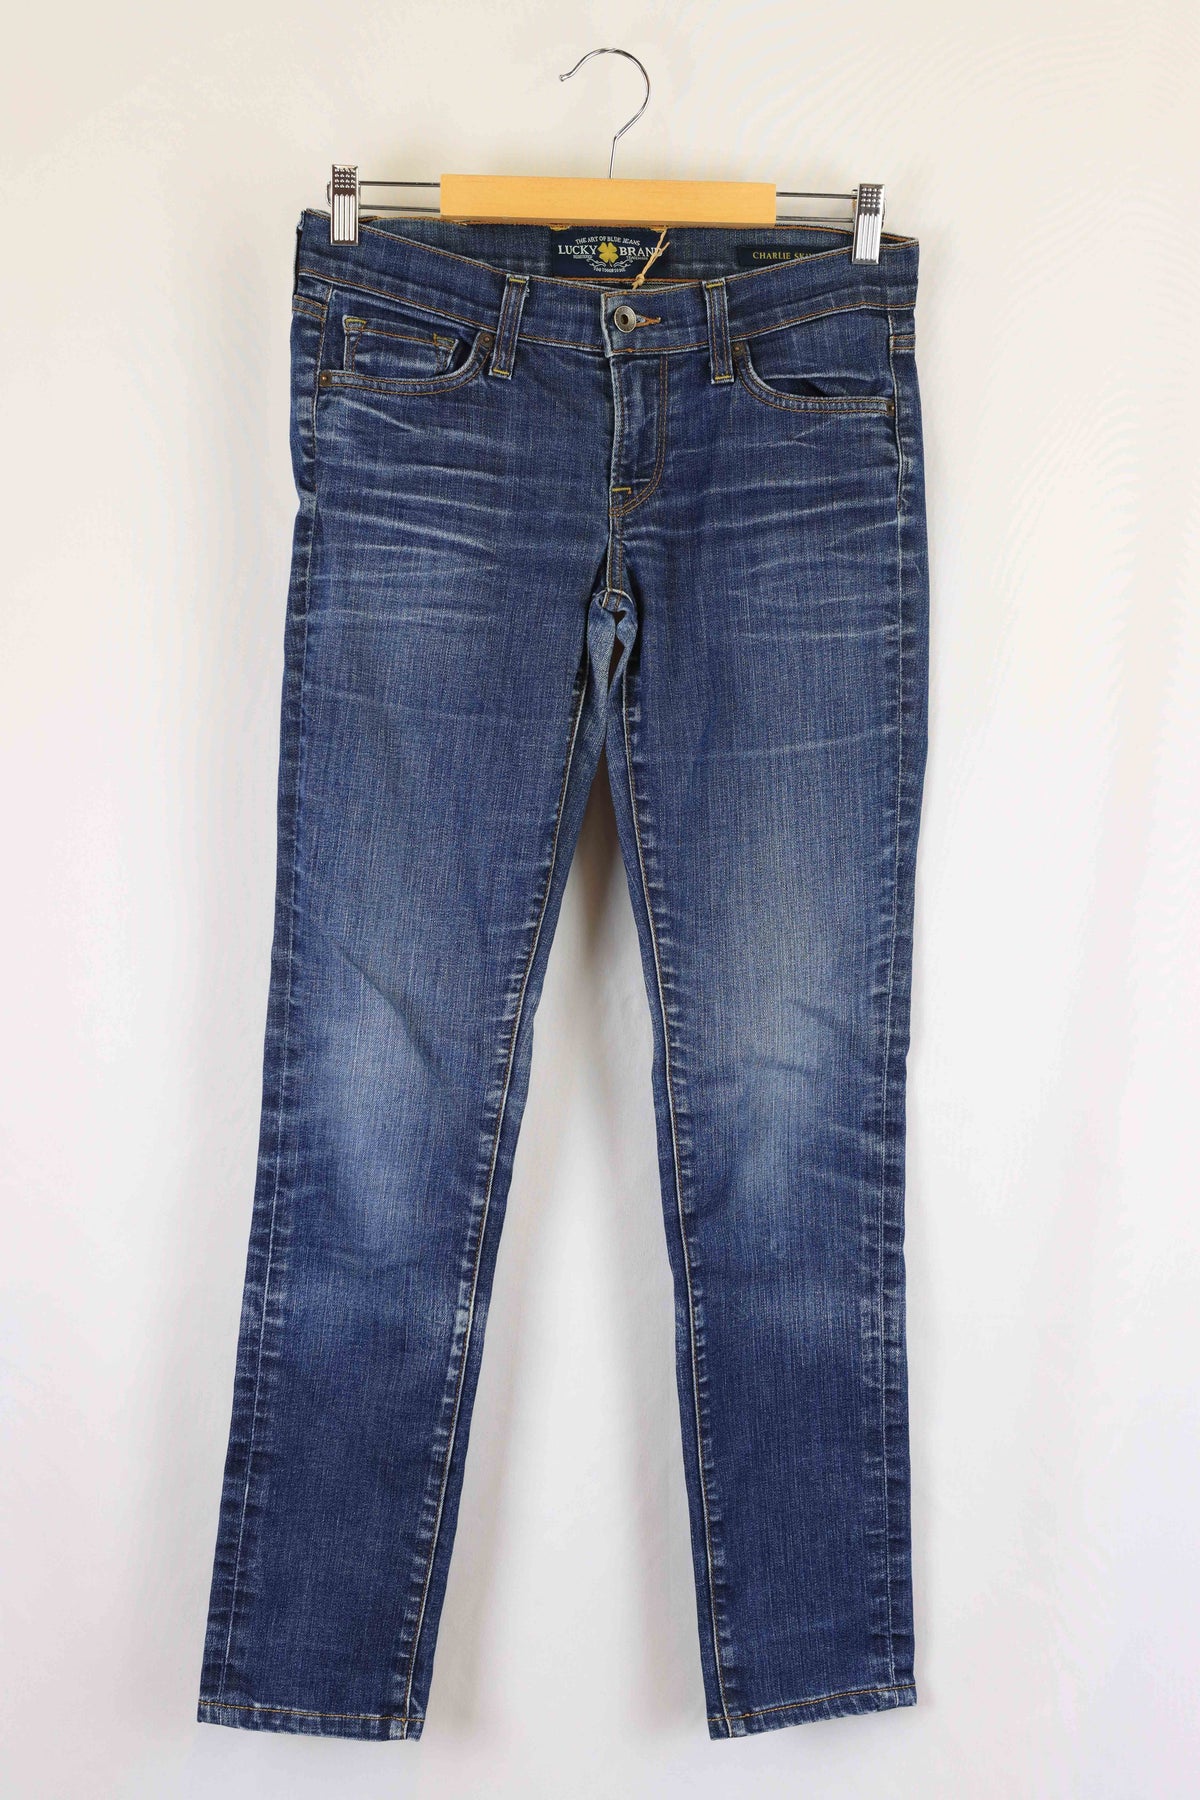 Lucky Brand Blue Jeans 8